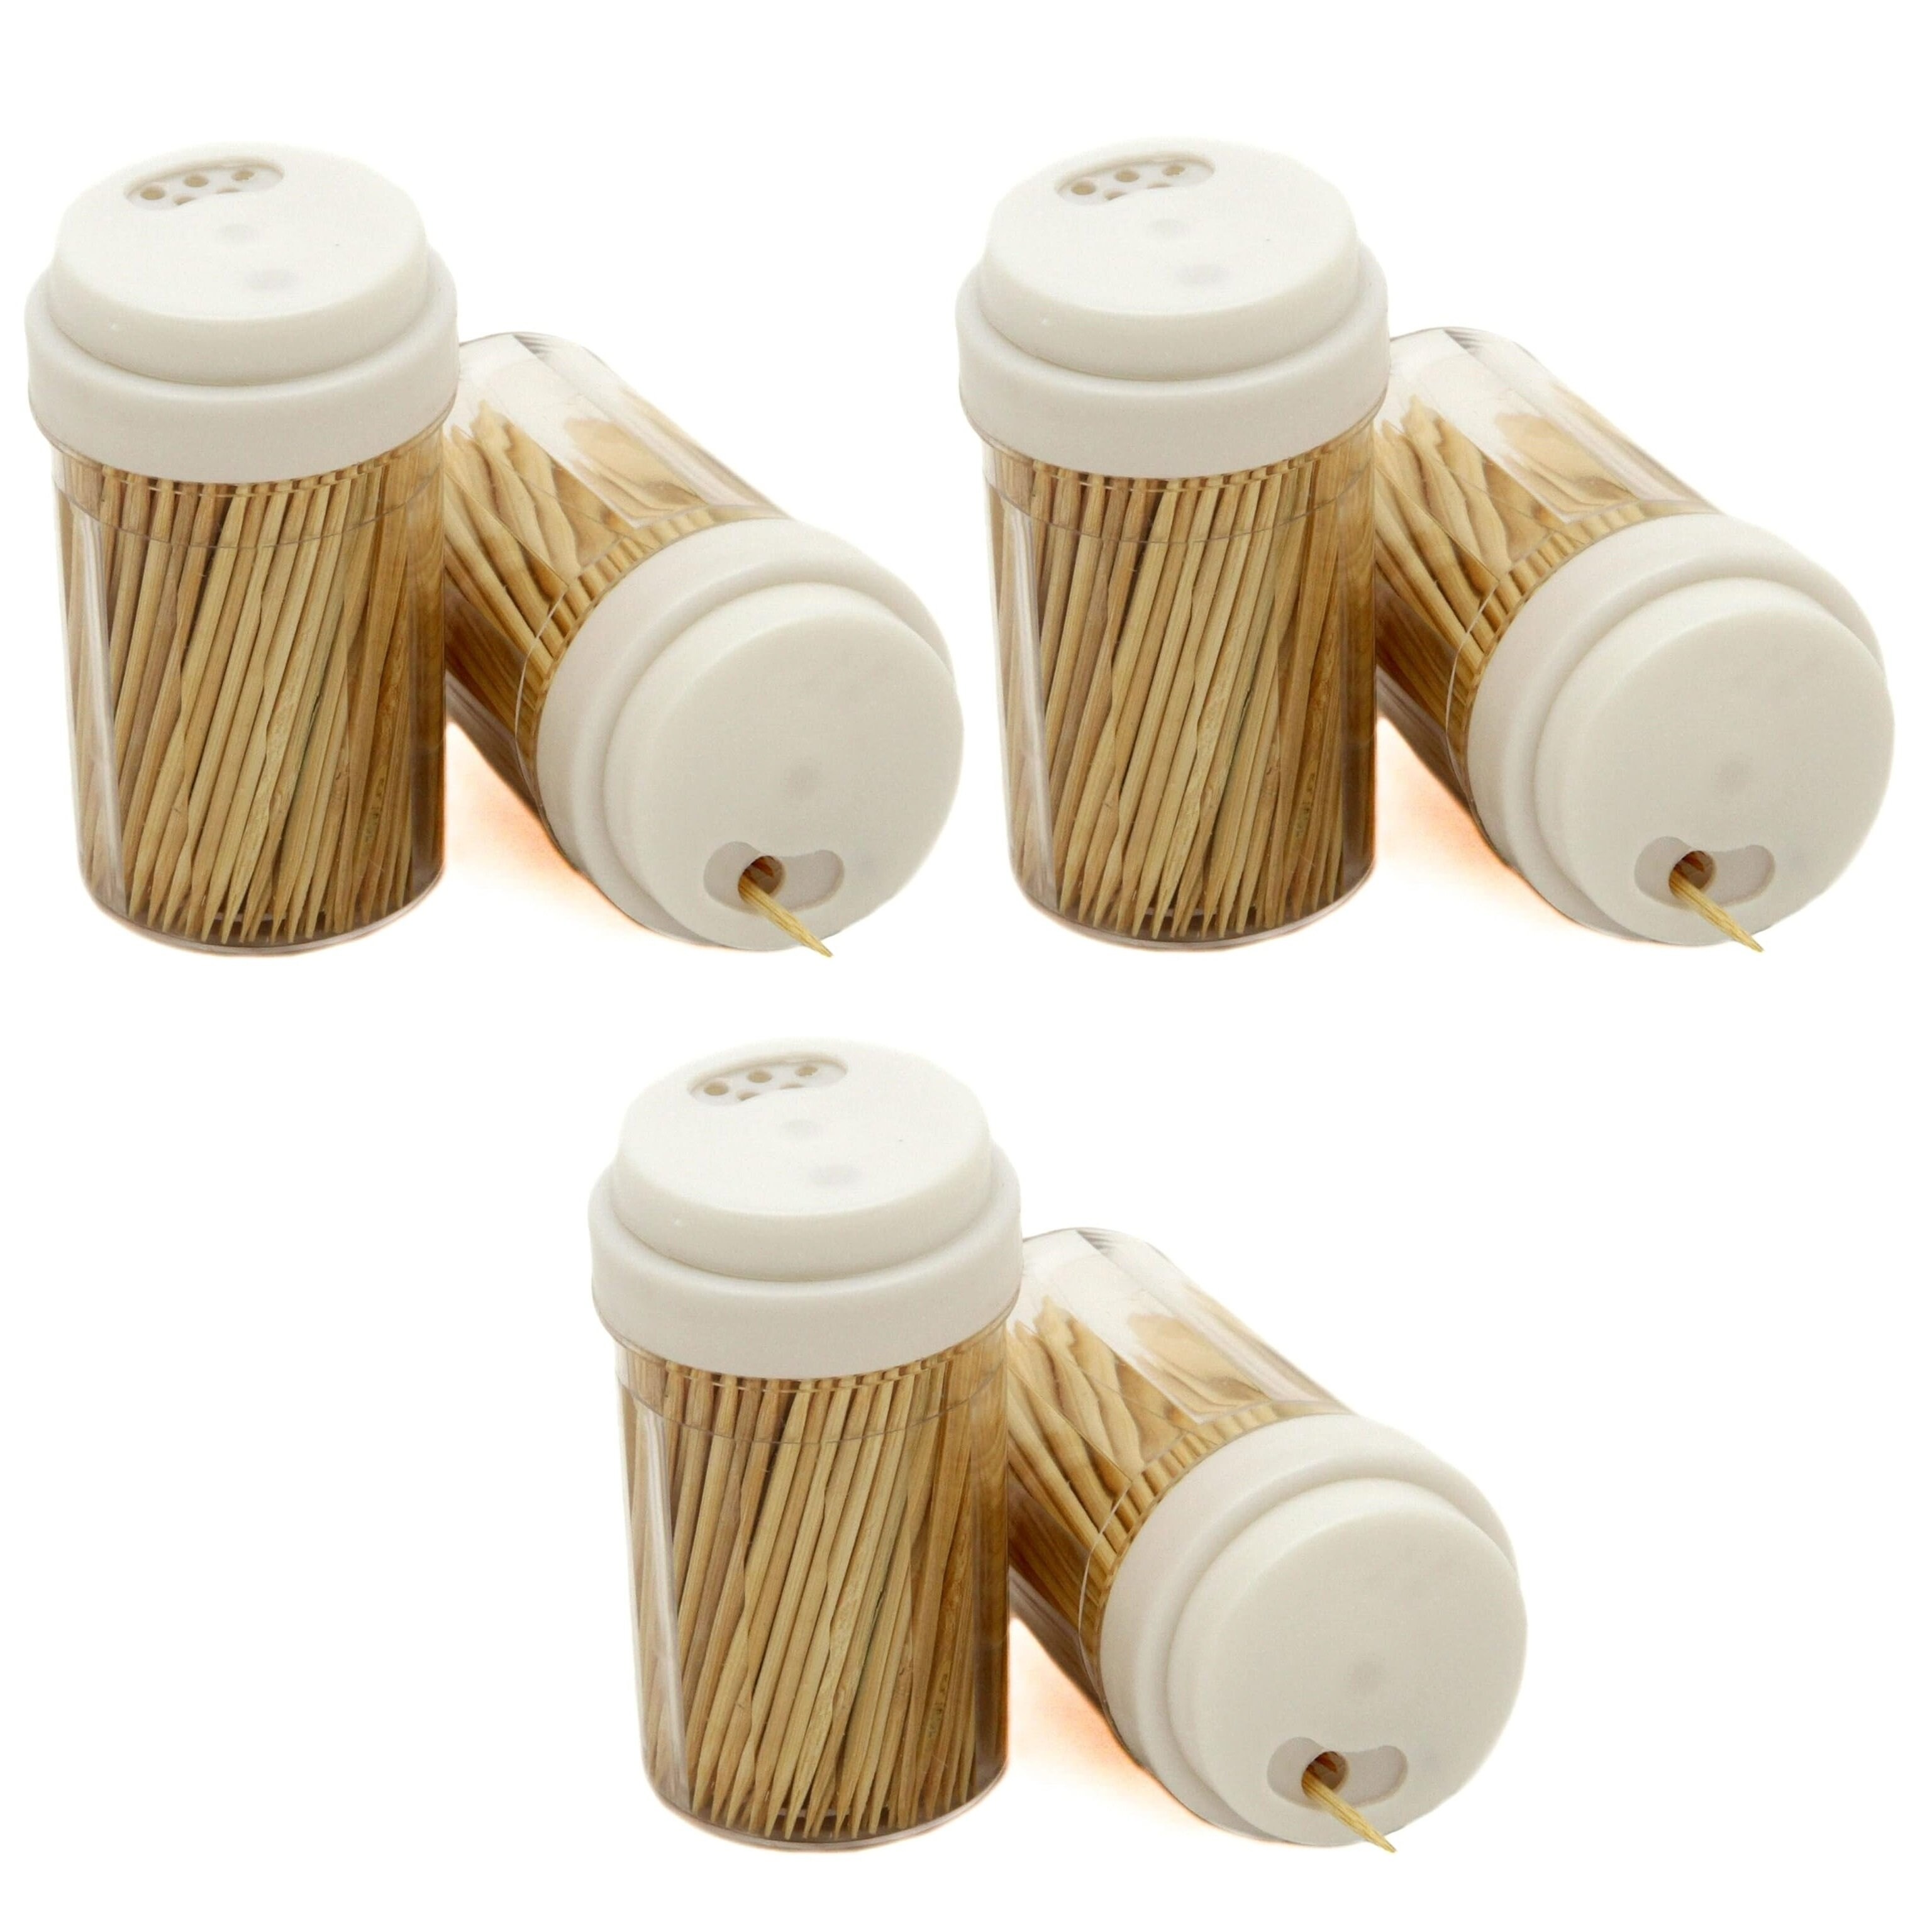 https://ak1.ostkcdn.com/images/products/is/images/direct/c0cc44a29bc4f6a2a3a653ff1d2853be7970e93a/Chef-Craft-2pc-Select-Toothpick-Container-Holders-with-500-Natural-Bamboo-Toothpicks.jpg